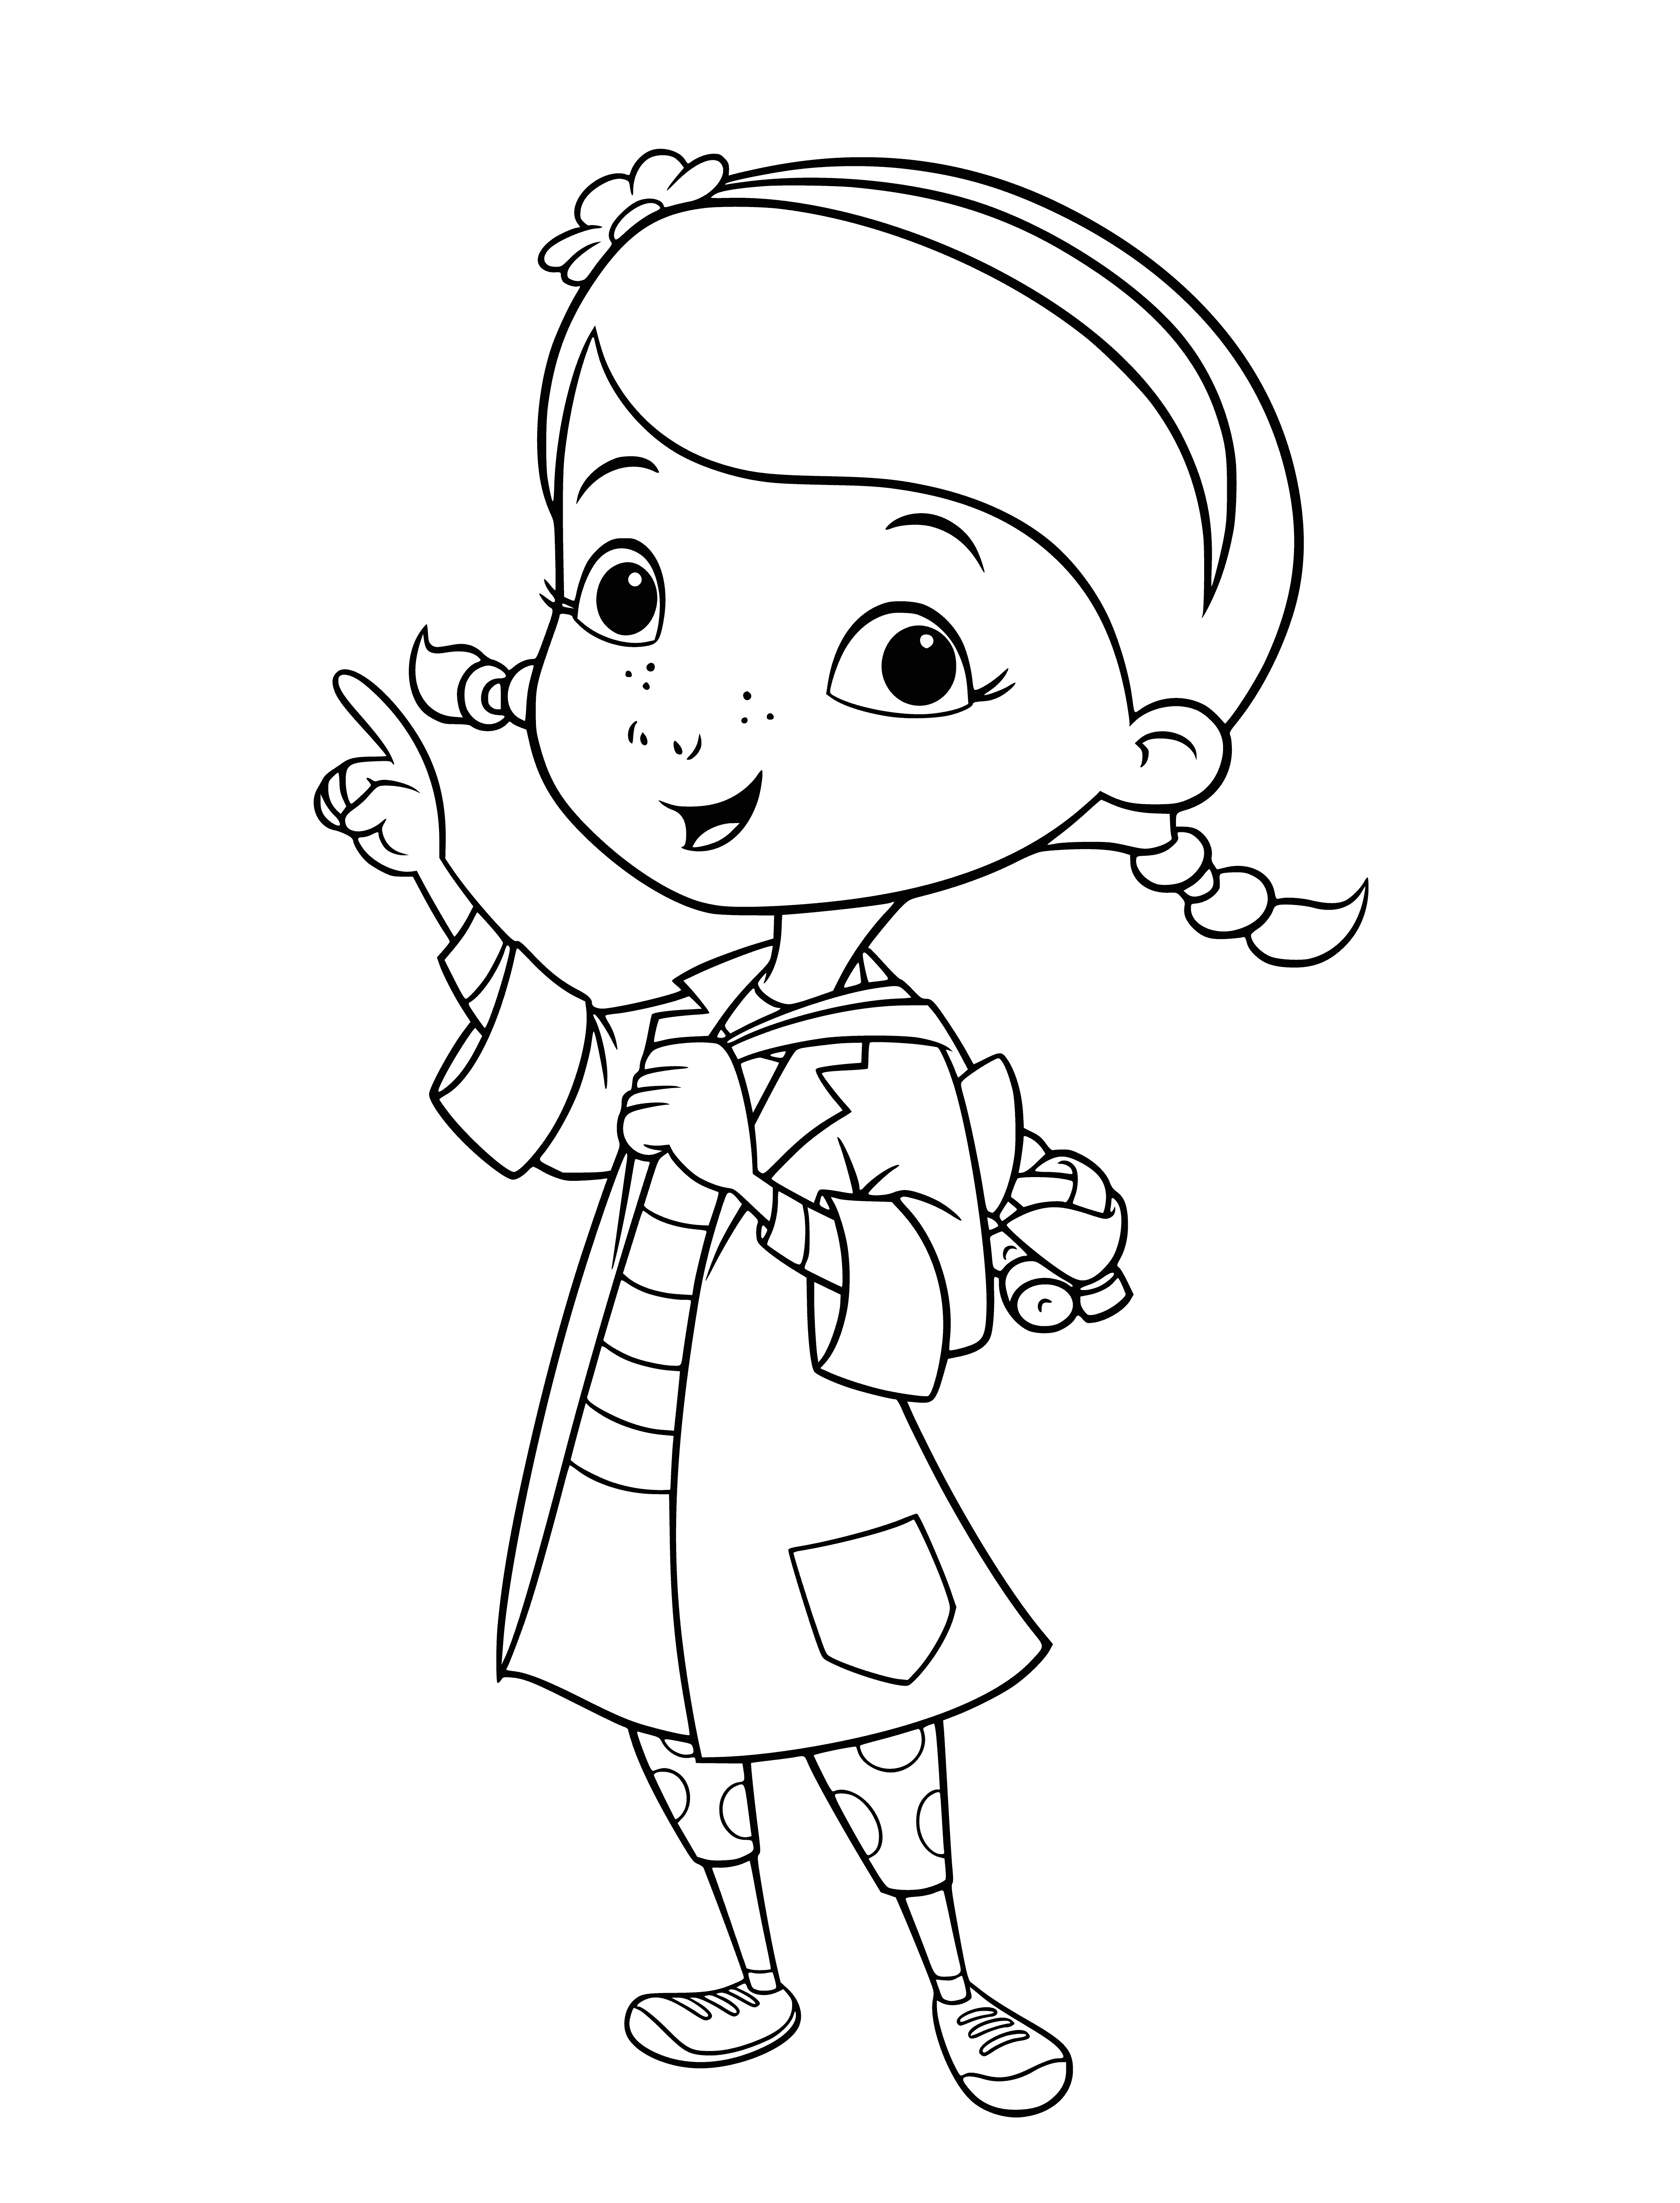 coloring page: A childhood girl looks into the camera, big eyes and puffy cheeks - wearing glasses, a headband and two floppy ears. #DocMcStuffins